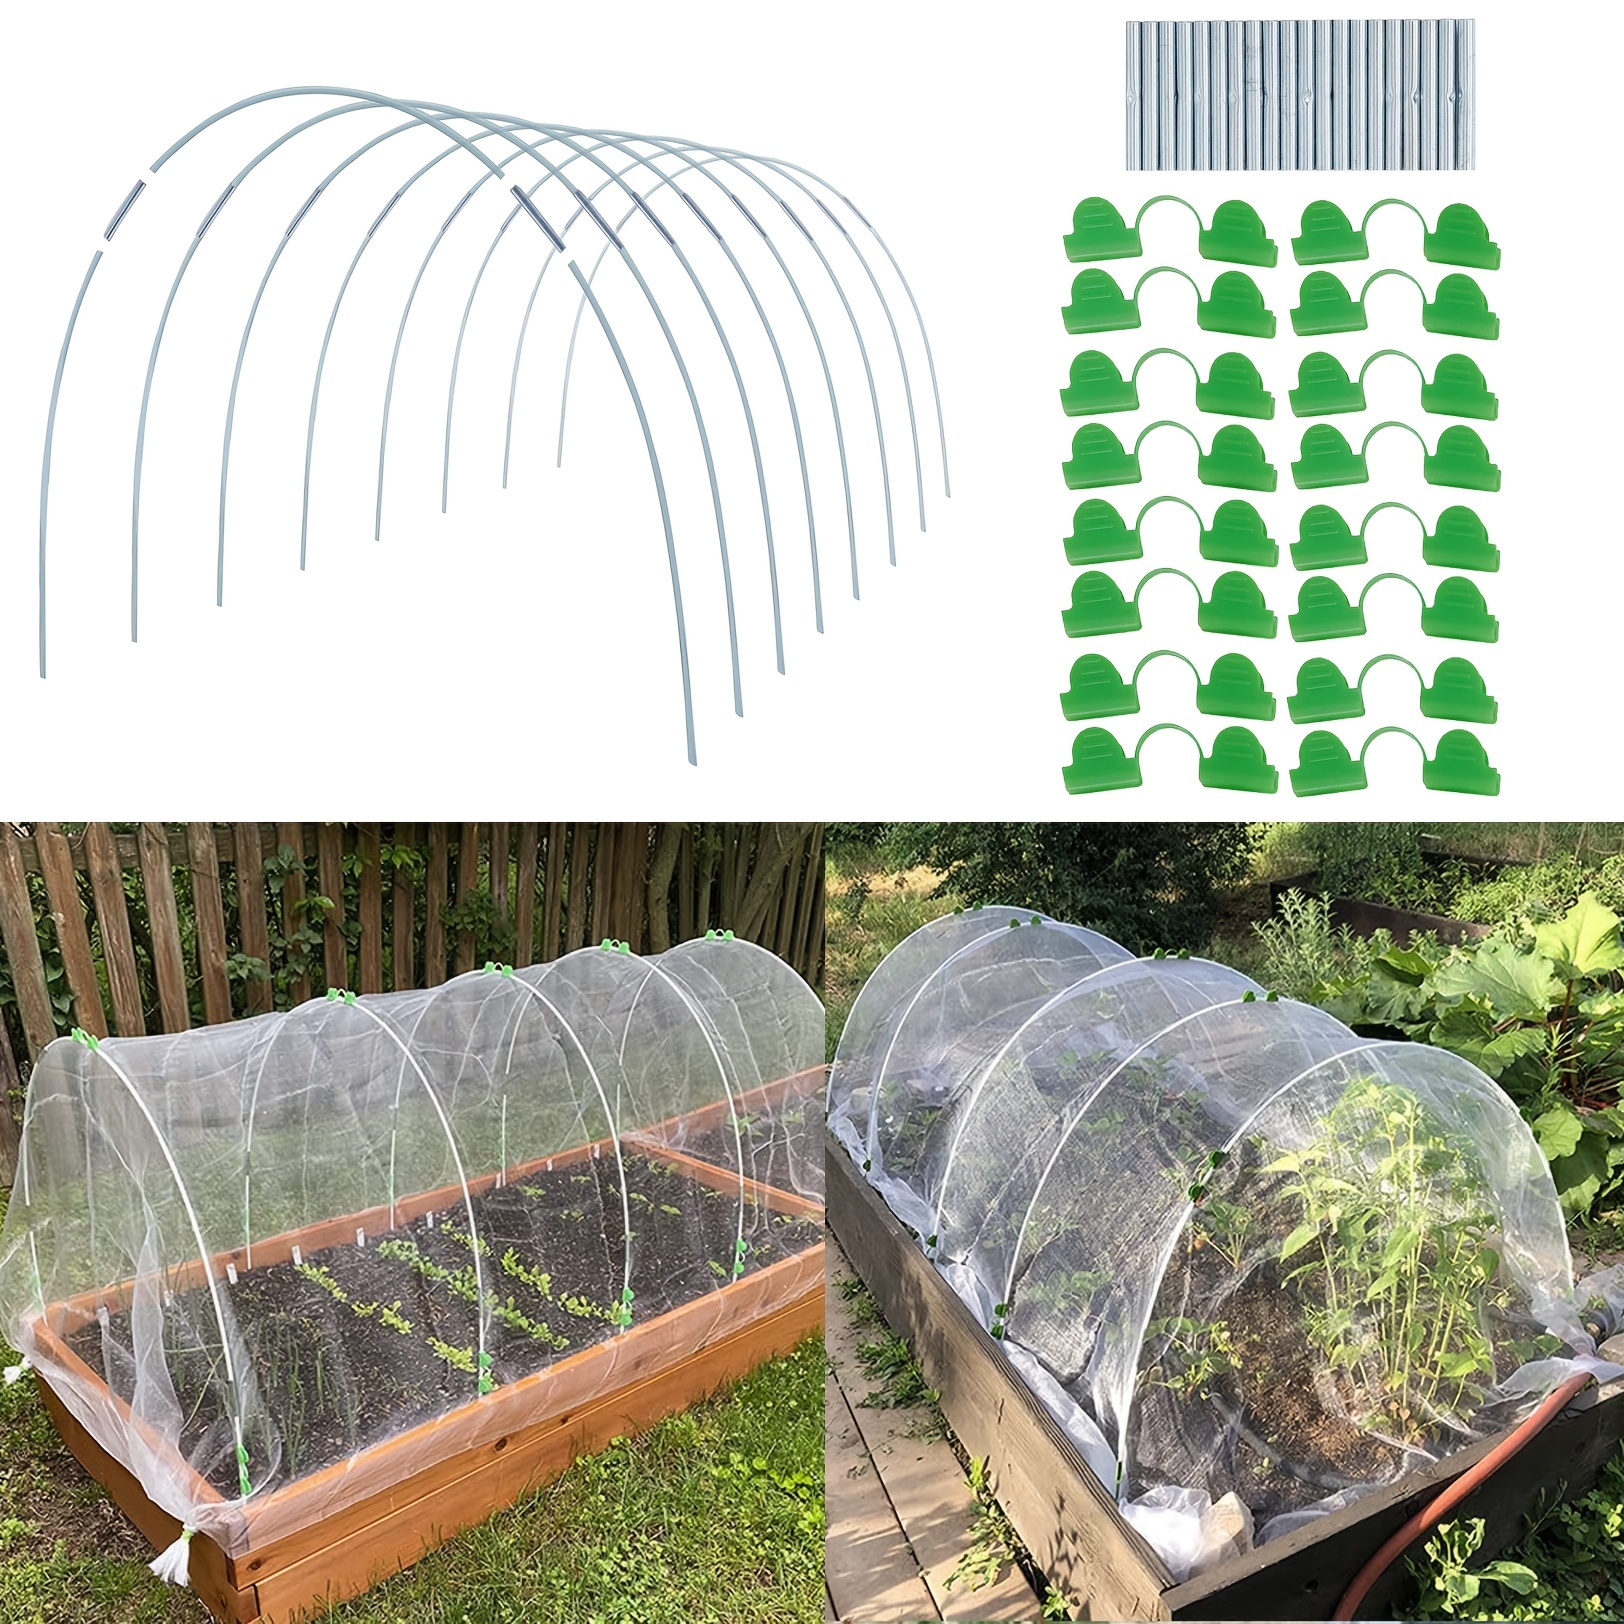 

25pcs Rust-free Fiberglass Garden Support Hoops - Diy 1.4-2.5ft Wide Grow Tunnel For Fabric & Plant Support Garden Stakes